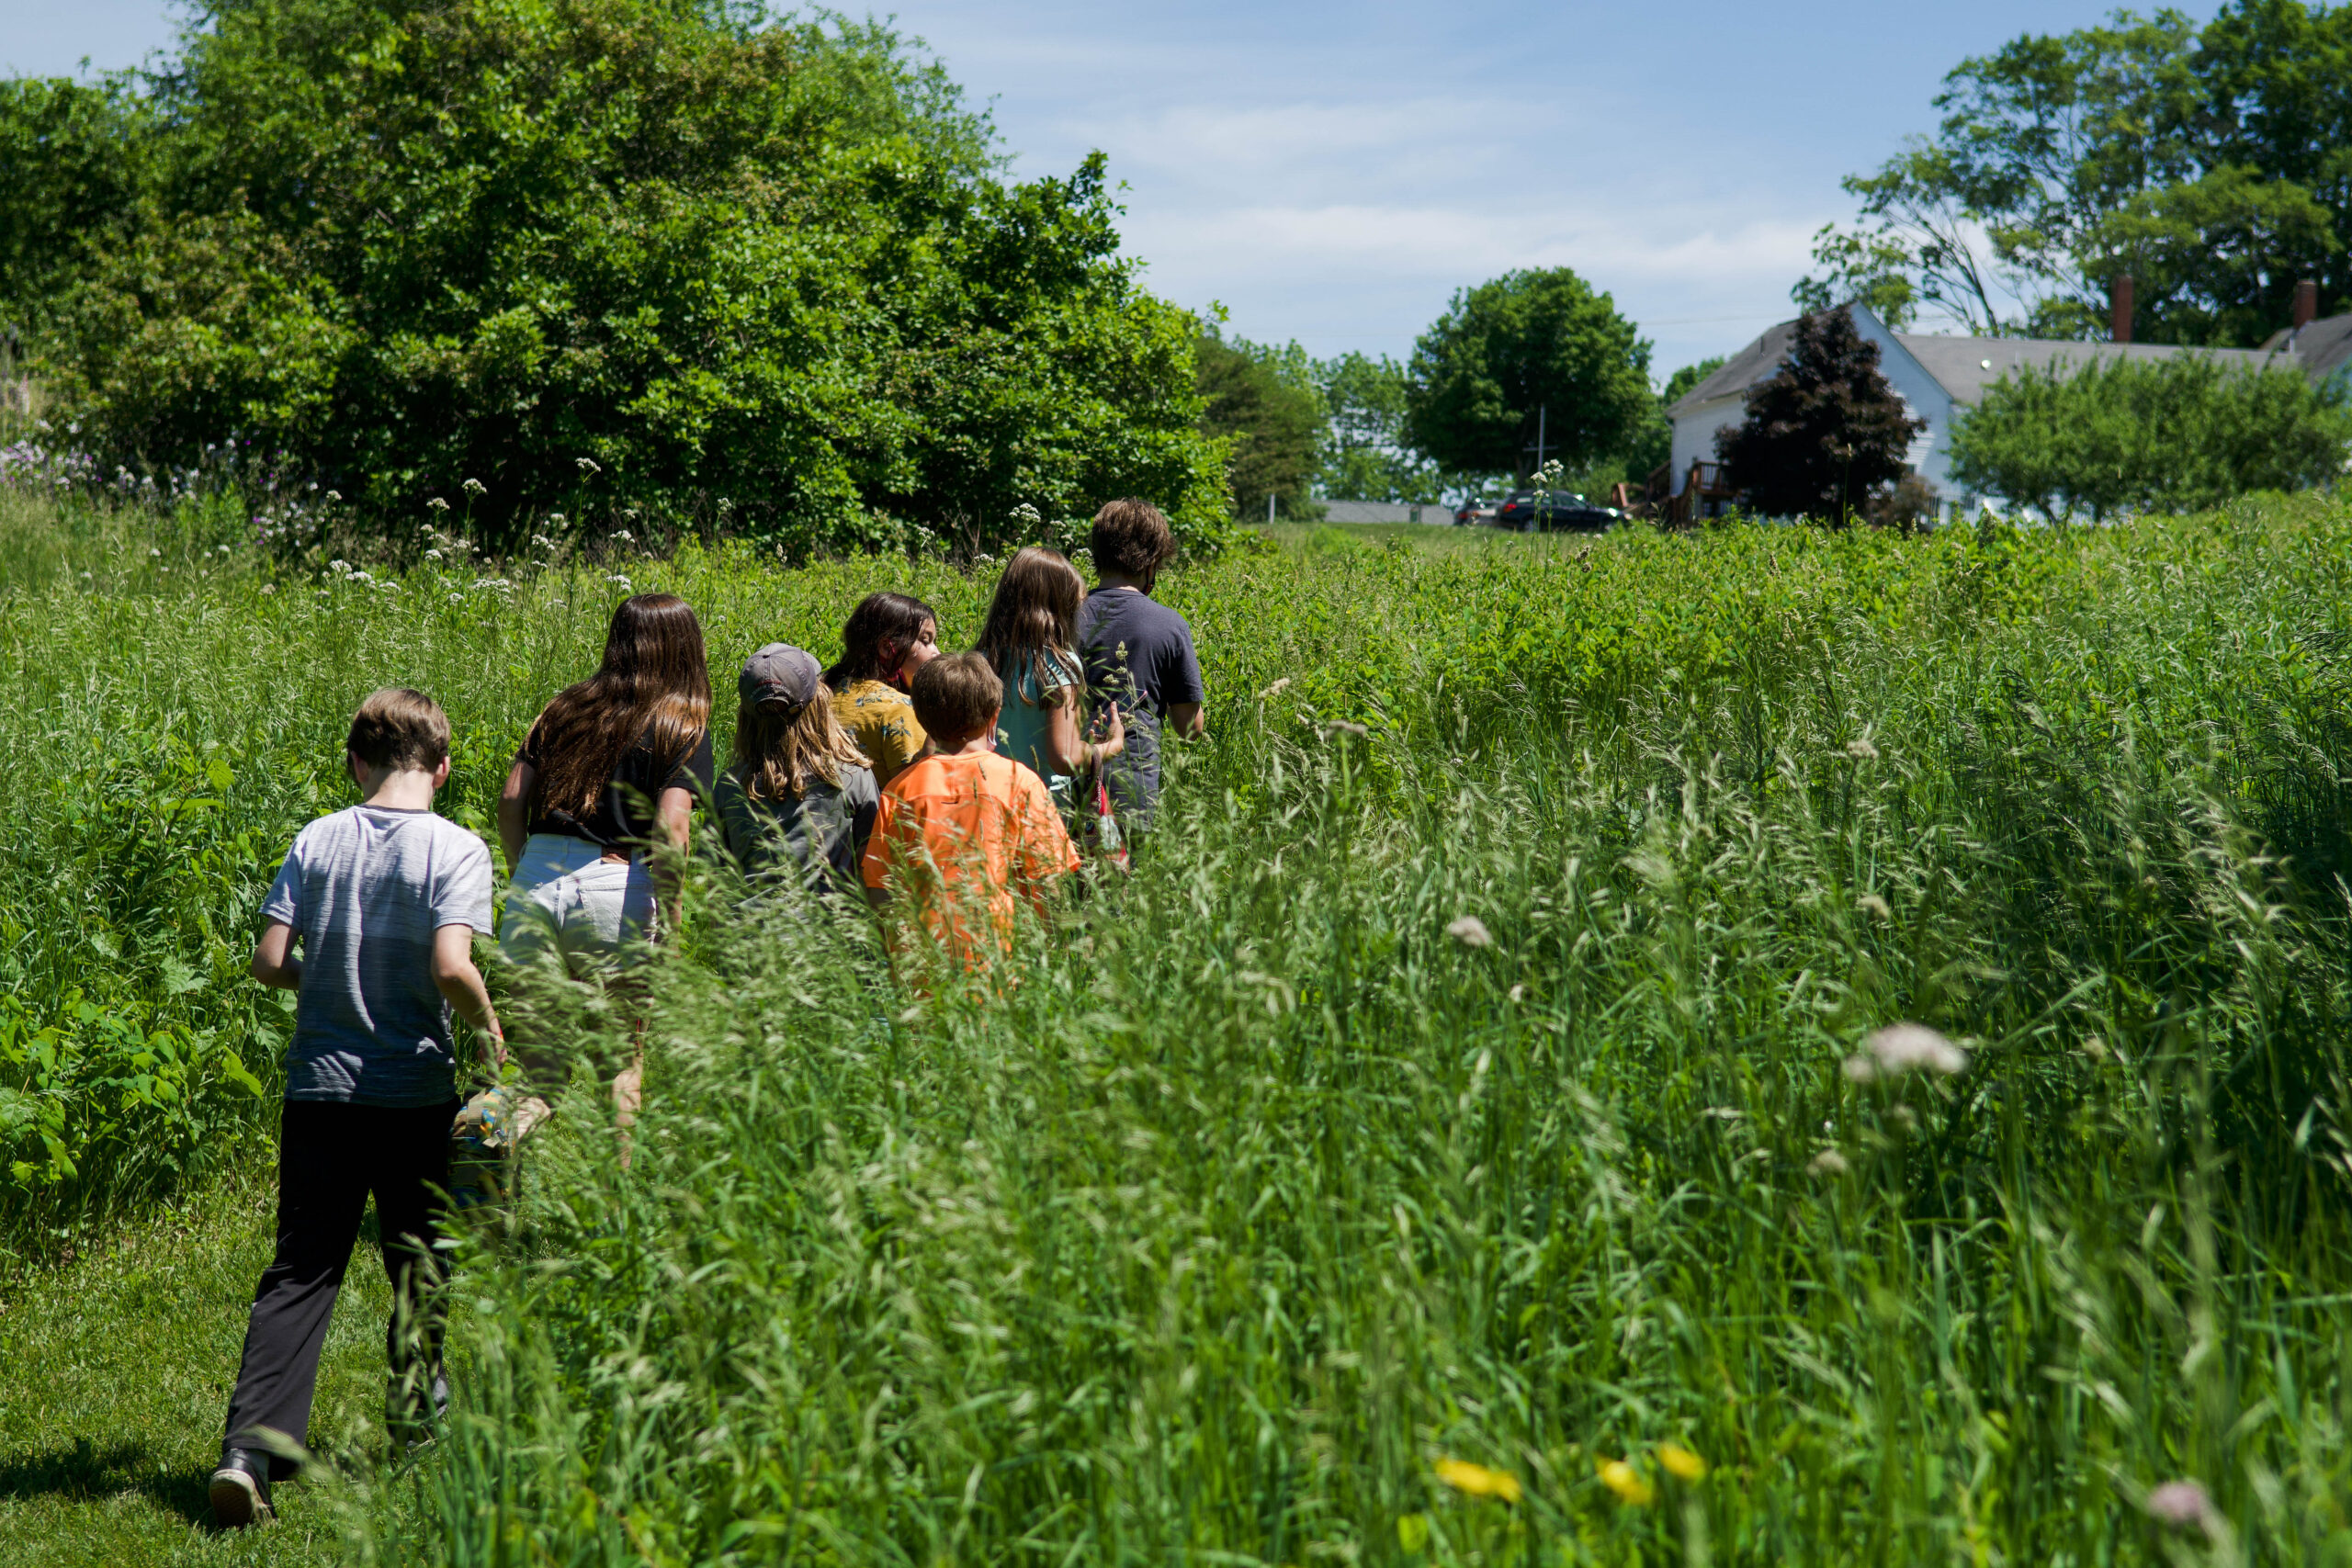 Children walk through tall grass with trees in the background.